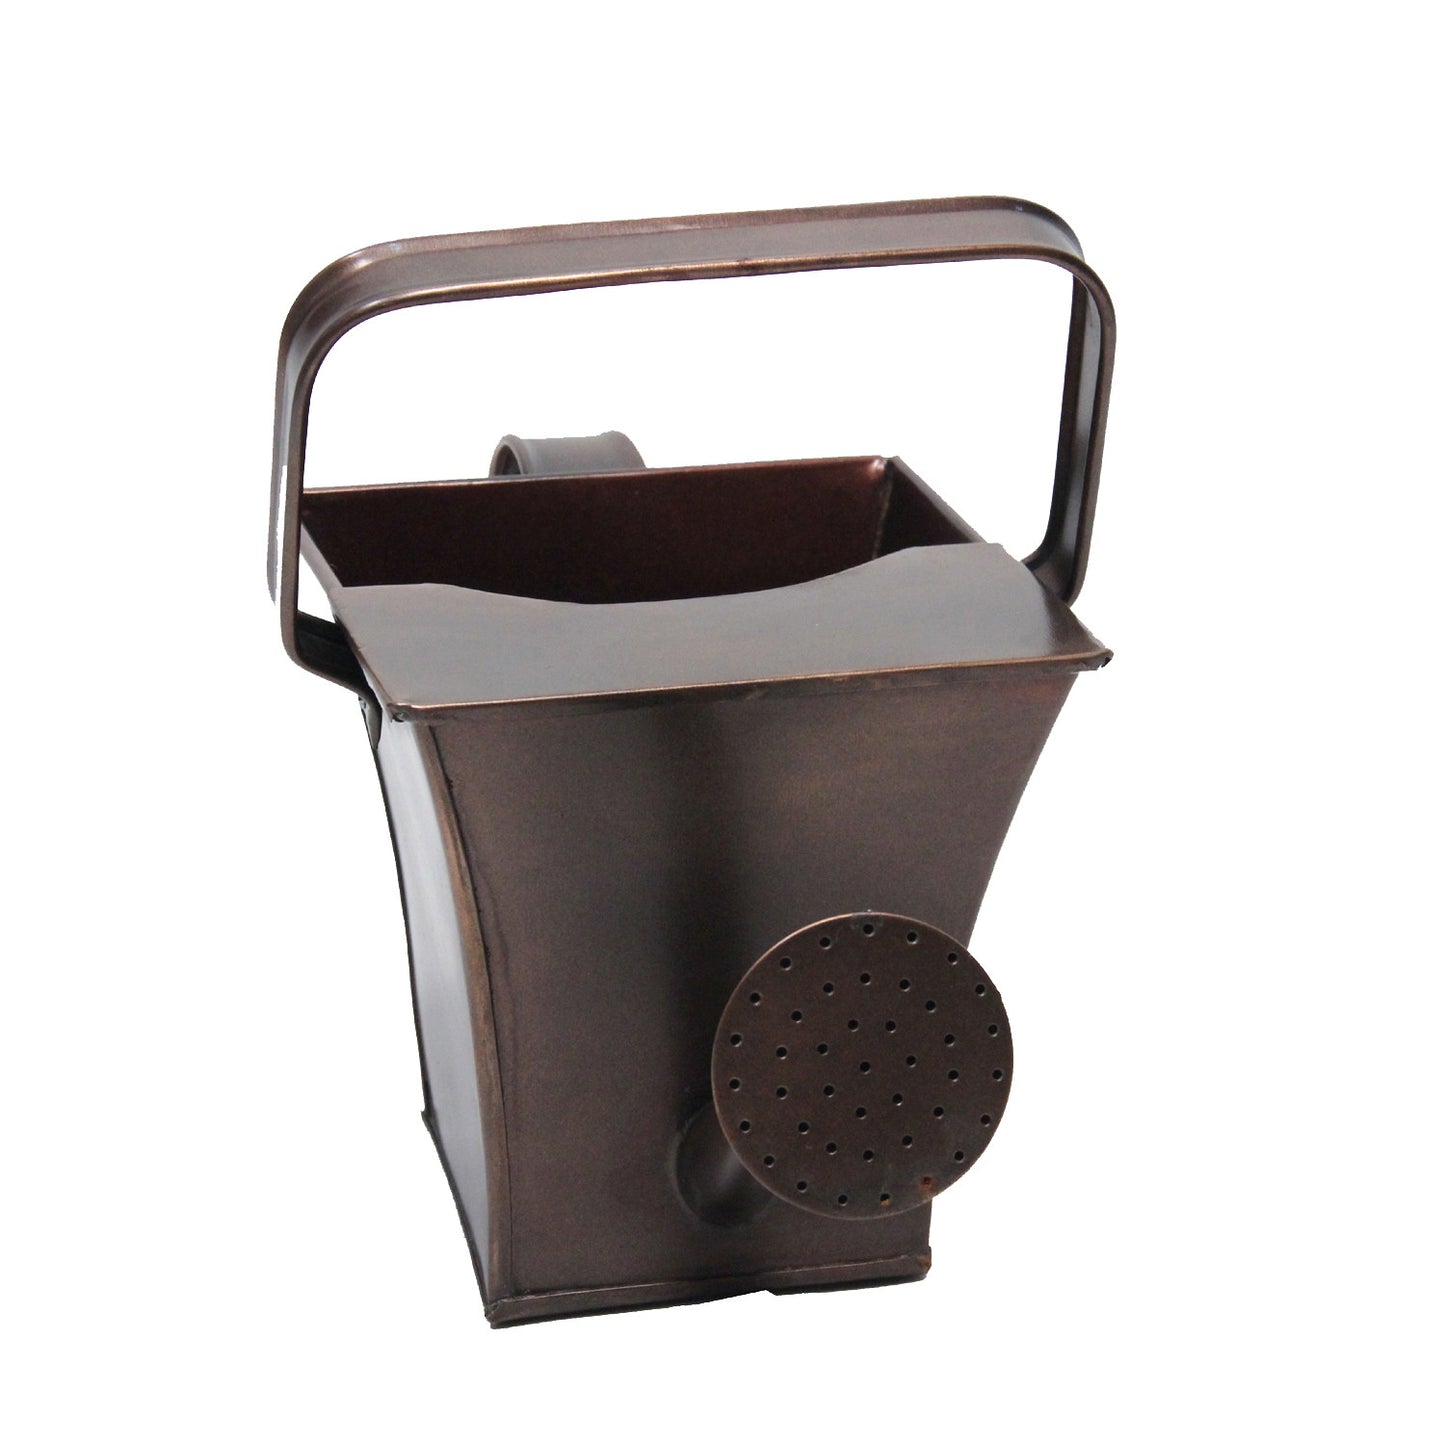 GiftBay Watering Can, Metal With Dual Handle 7" High, Small 0.6 Gallon, Antique Copper Finish